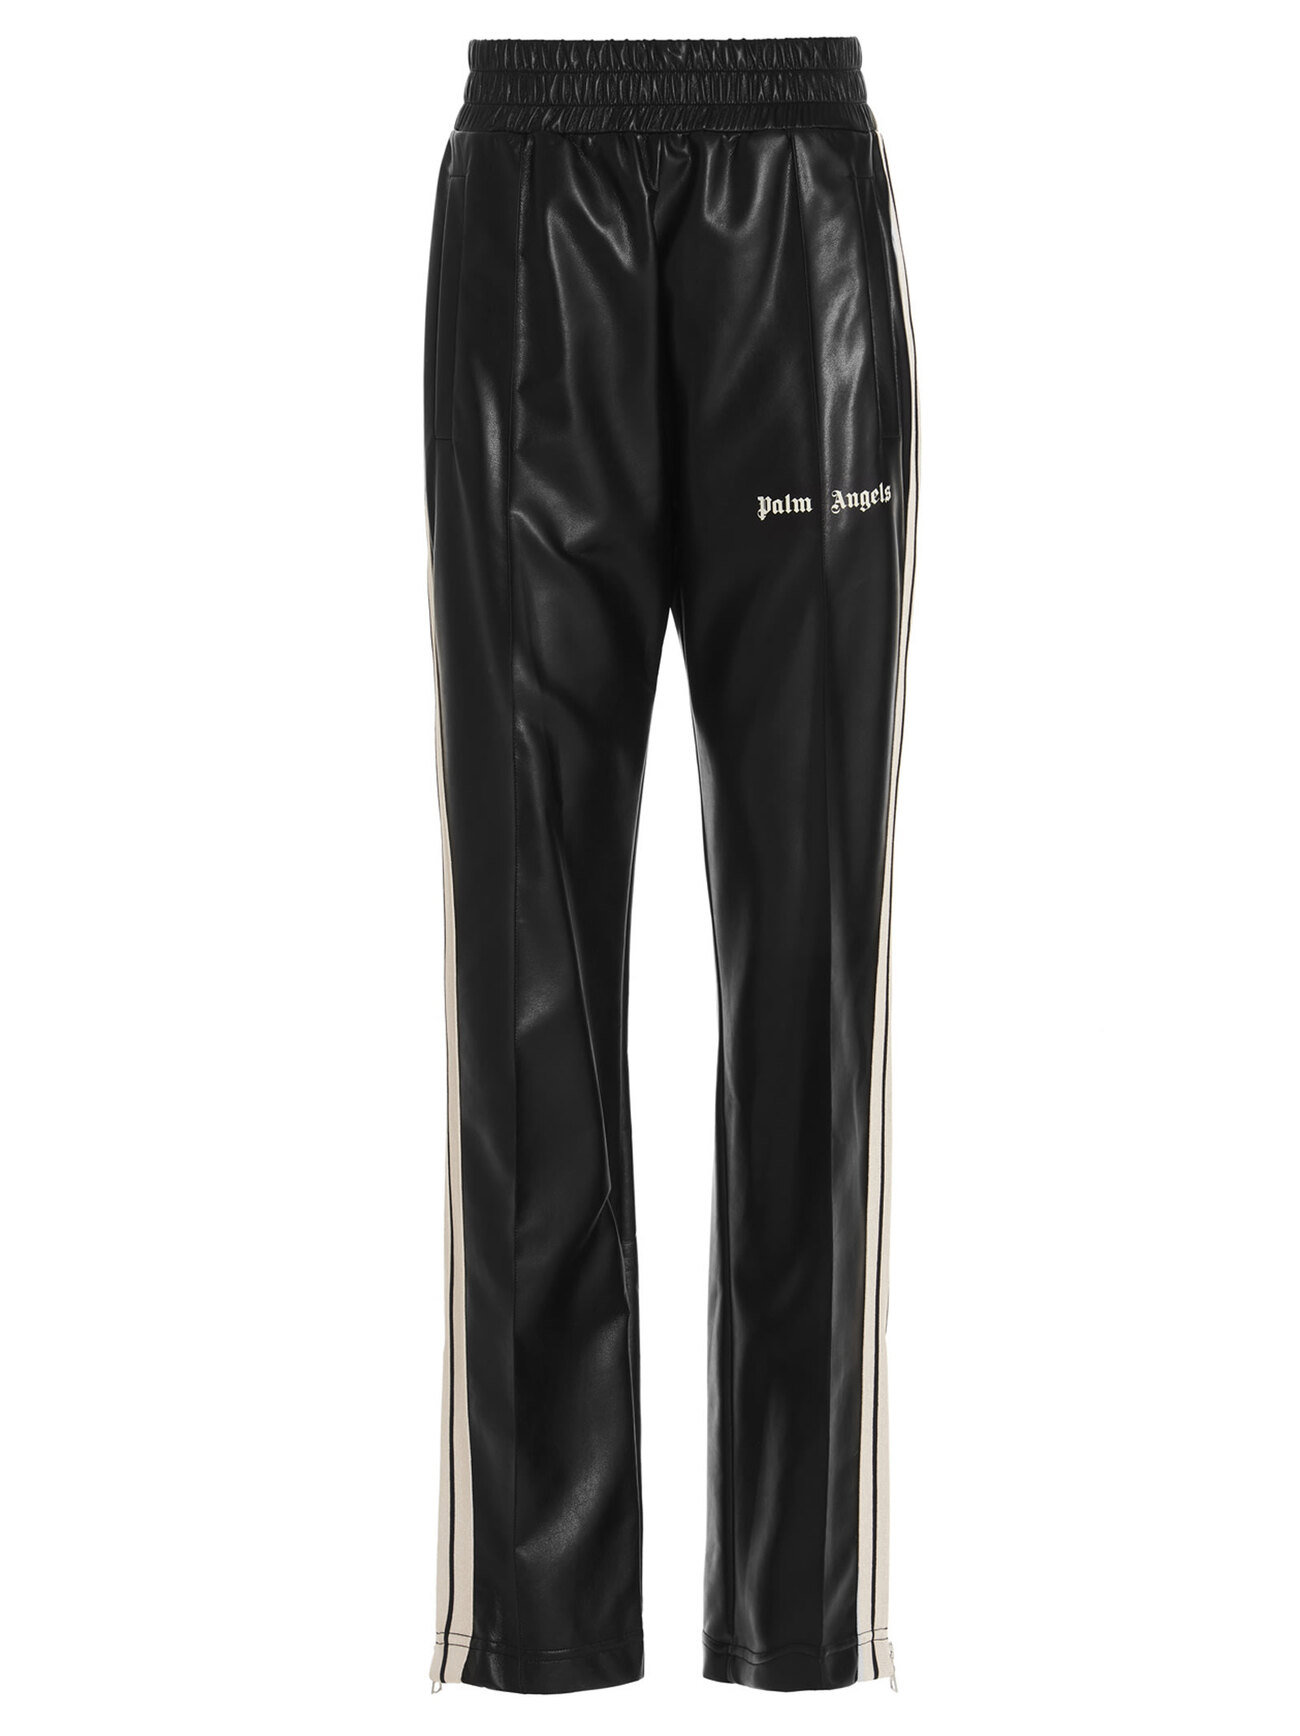 Palm Angels lll Trousers in black